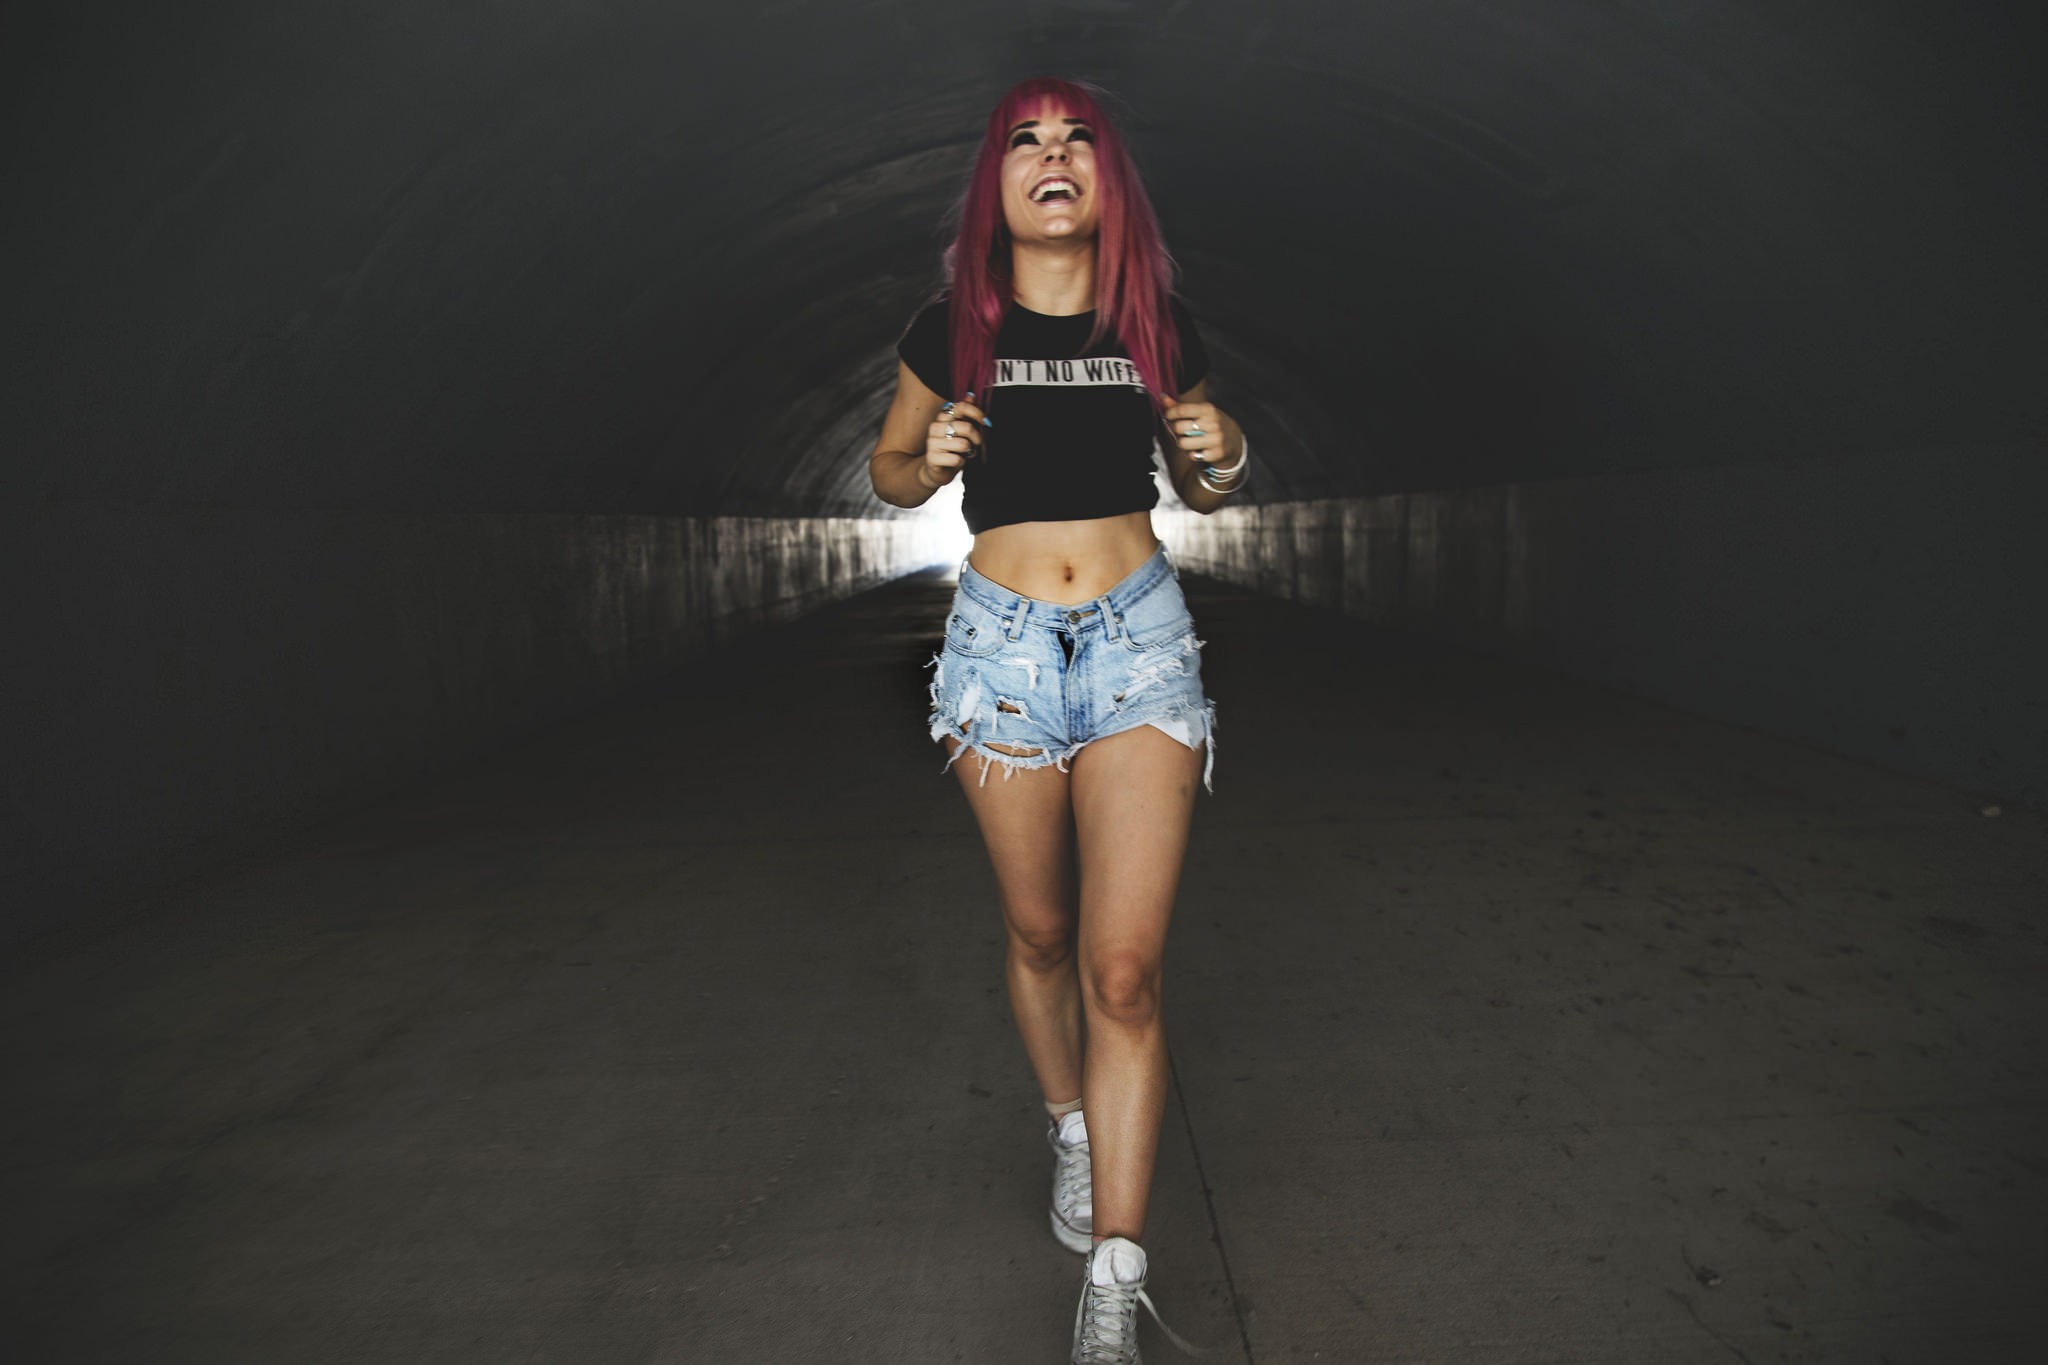 People 2048x1365 women dyed hair jean shorts tunnel smiling black top belly bare midriff open mouth women outdoors urban walking redhead printed shirts painted nails model